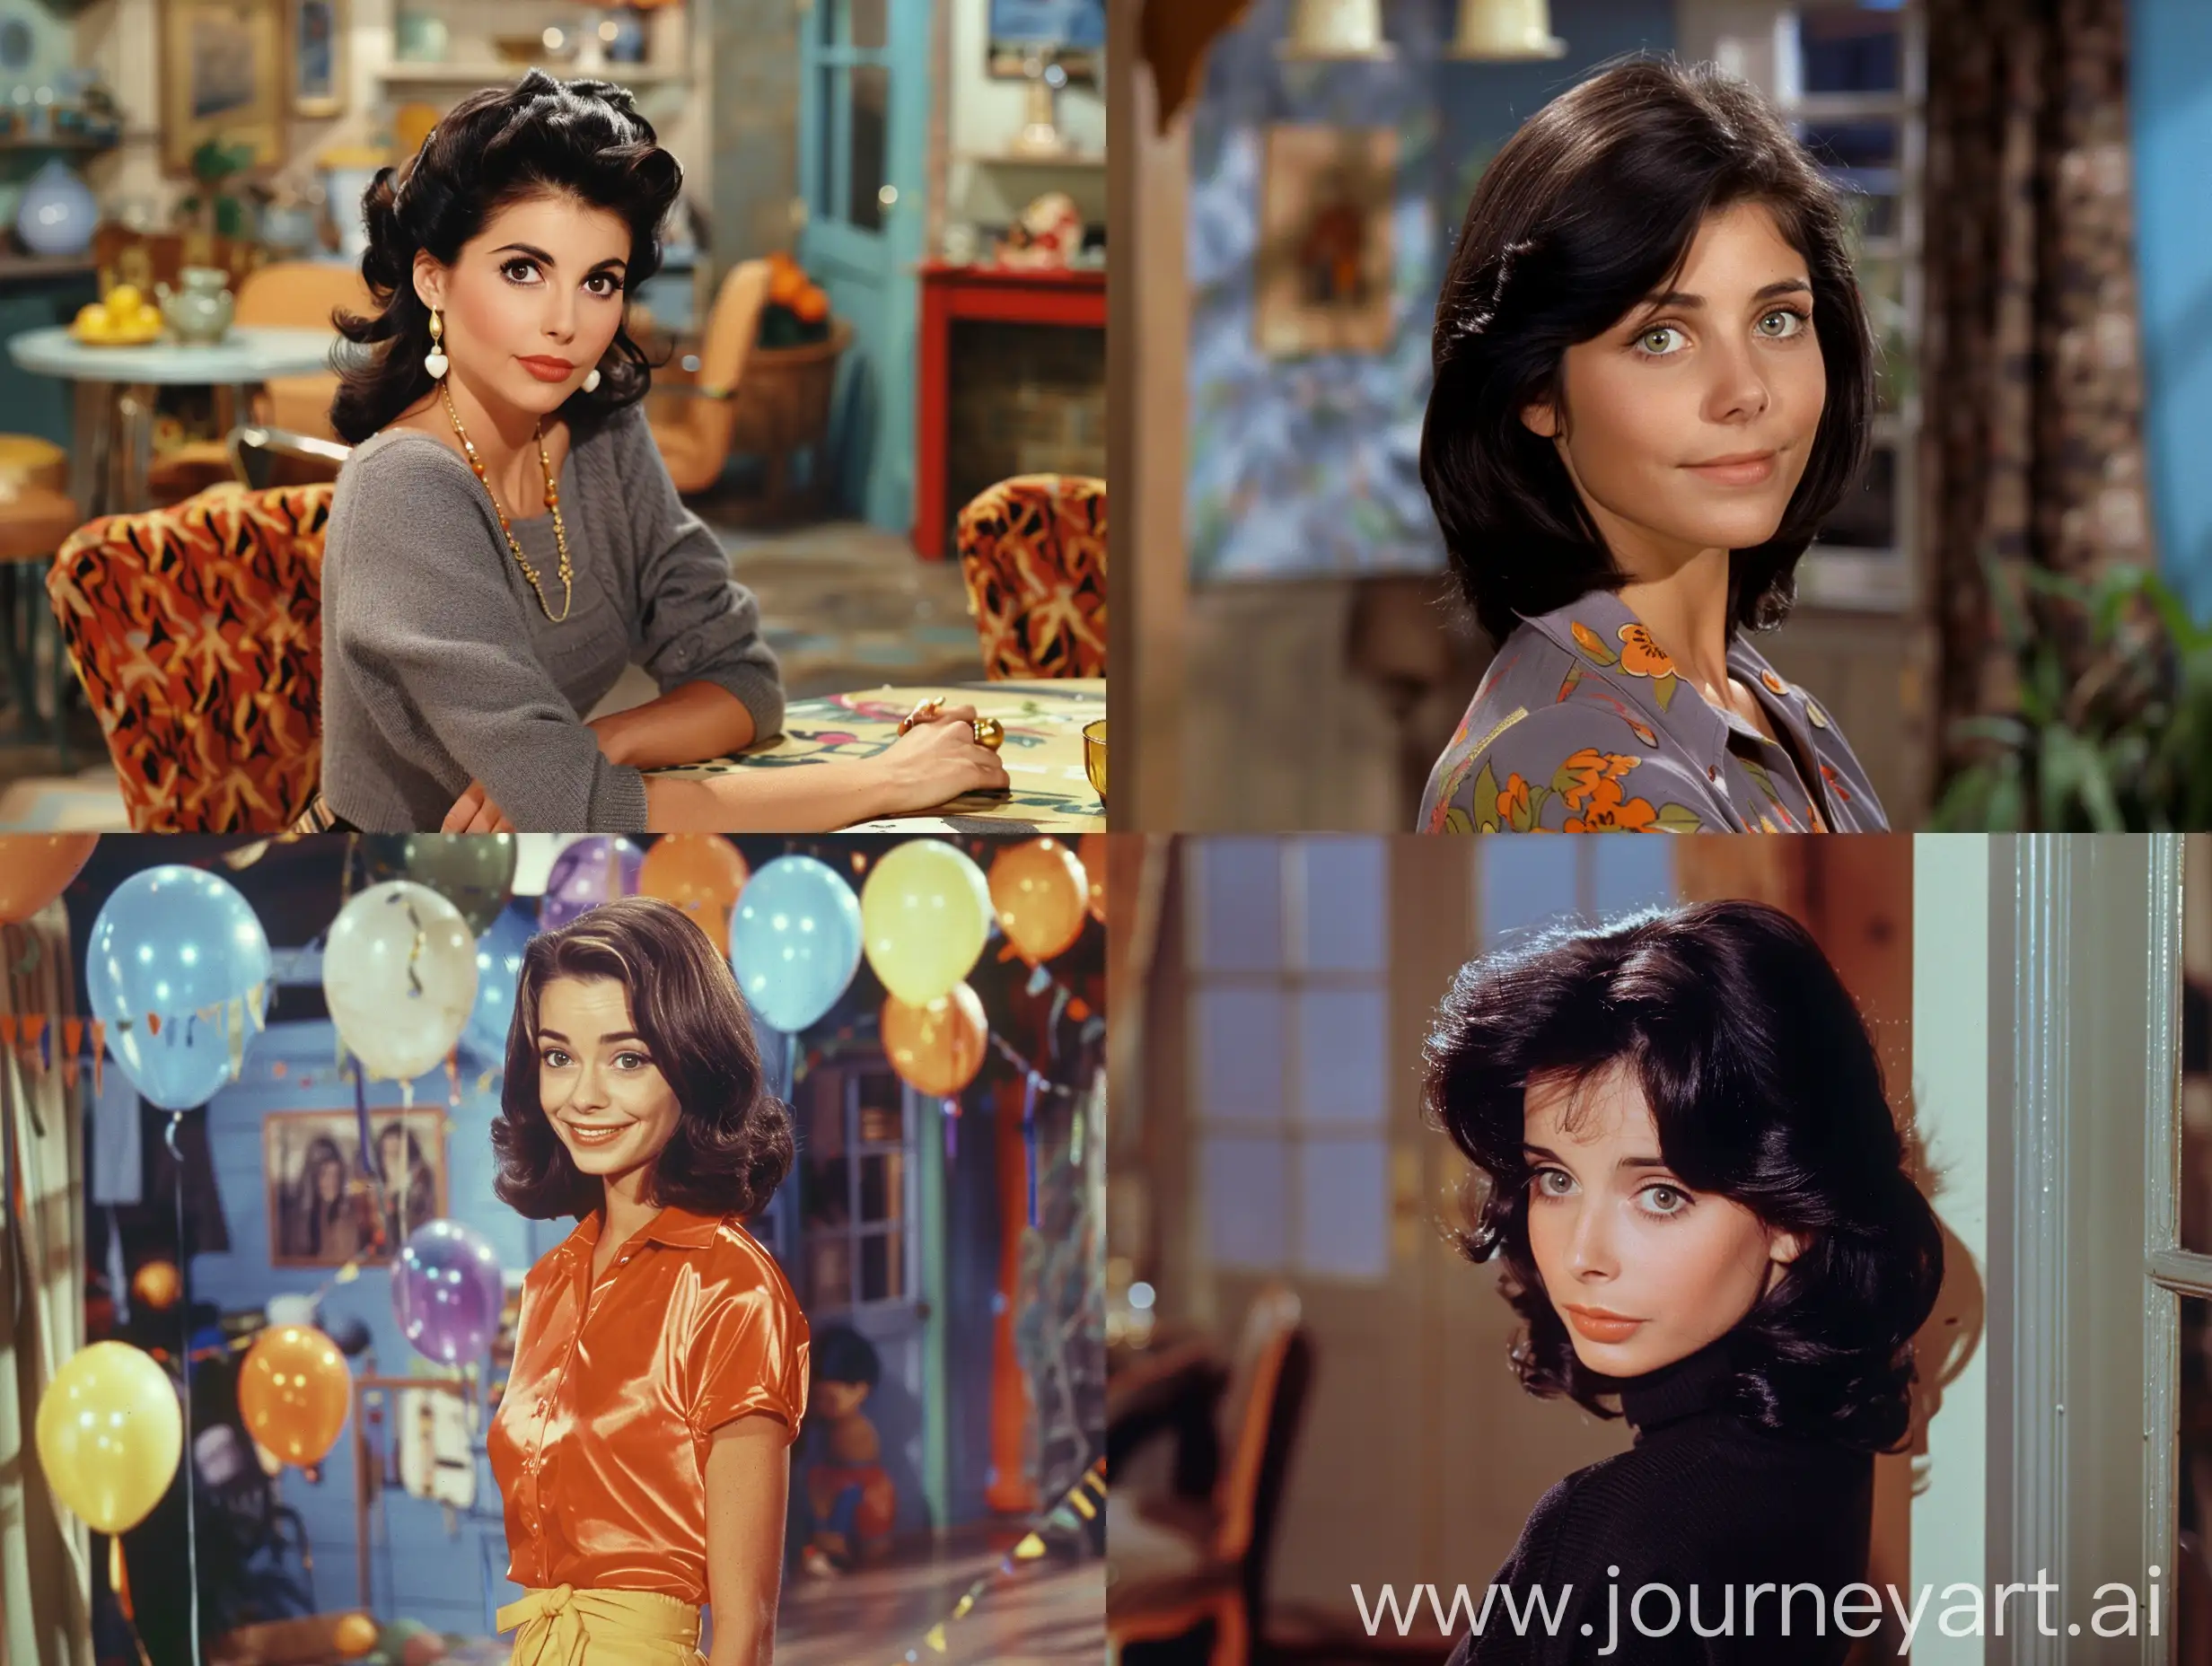 Monica-Geller-from-Friends-in-1950s-Super-Panavision-70-Colorful-Scene